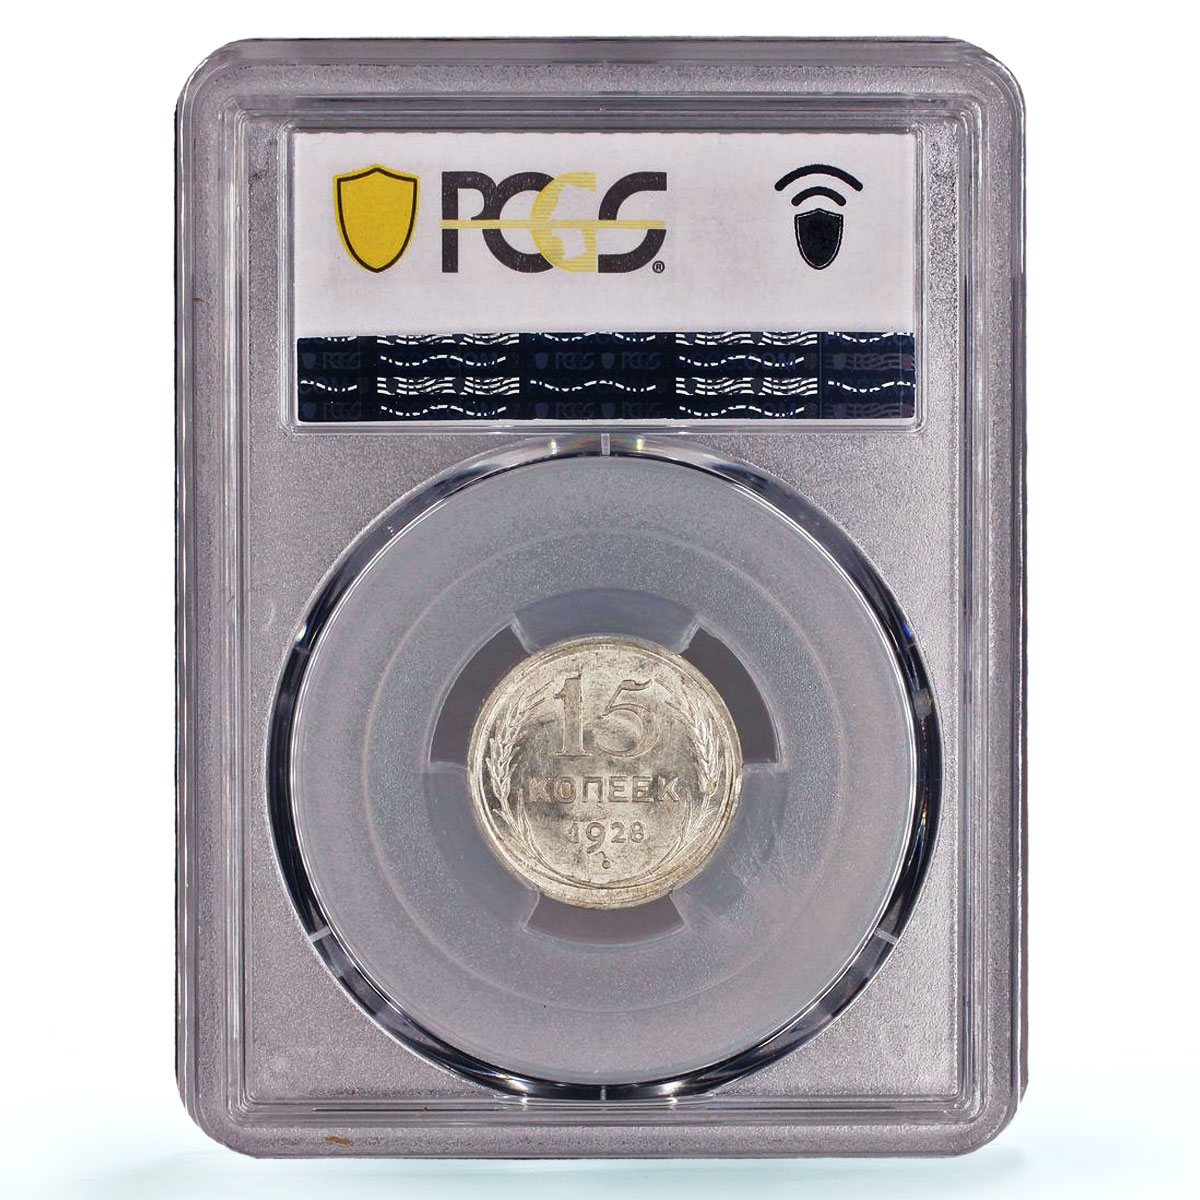 Russia USSR RSFSR 15 kopecks Regular Coinage Y-87 MS62 PCGS silver coin 1928